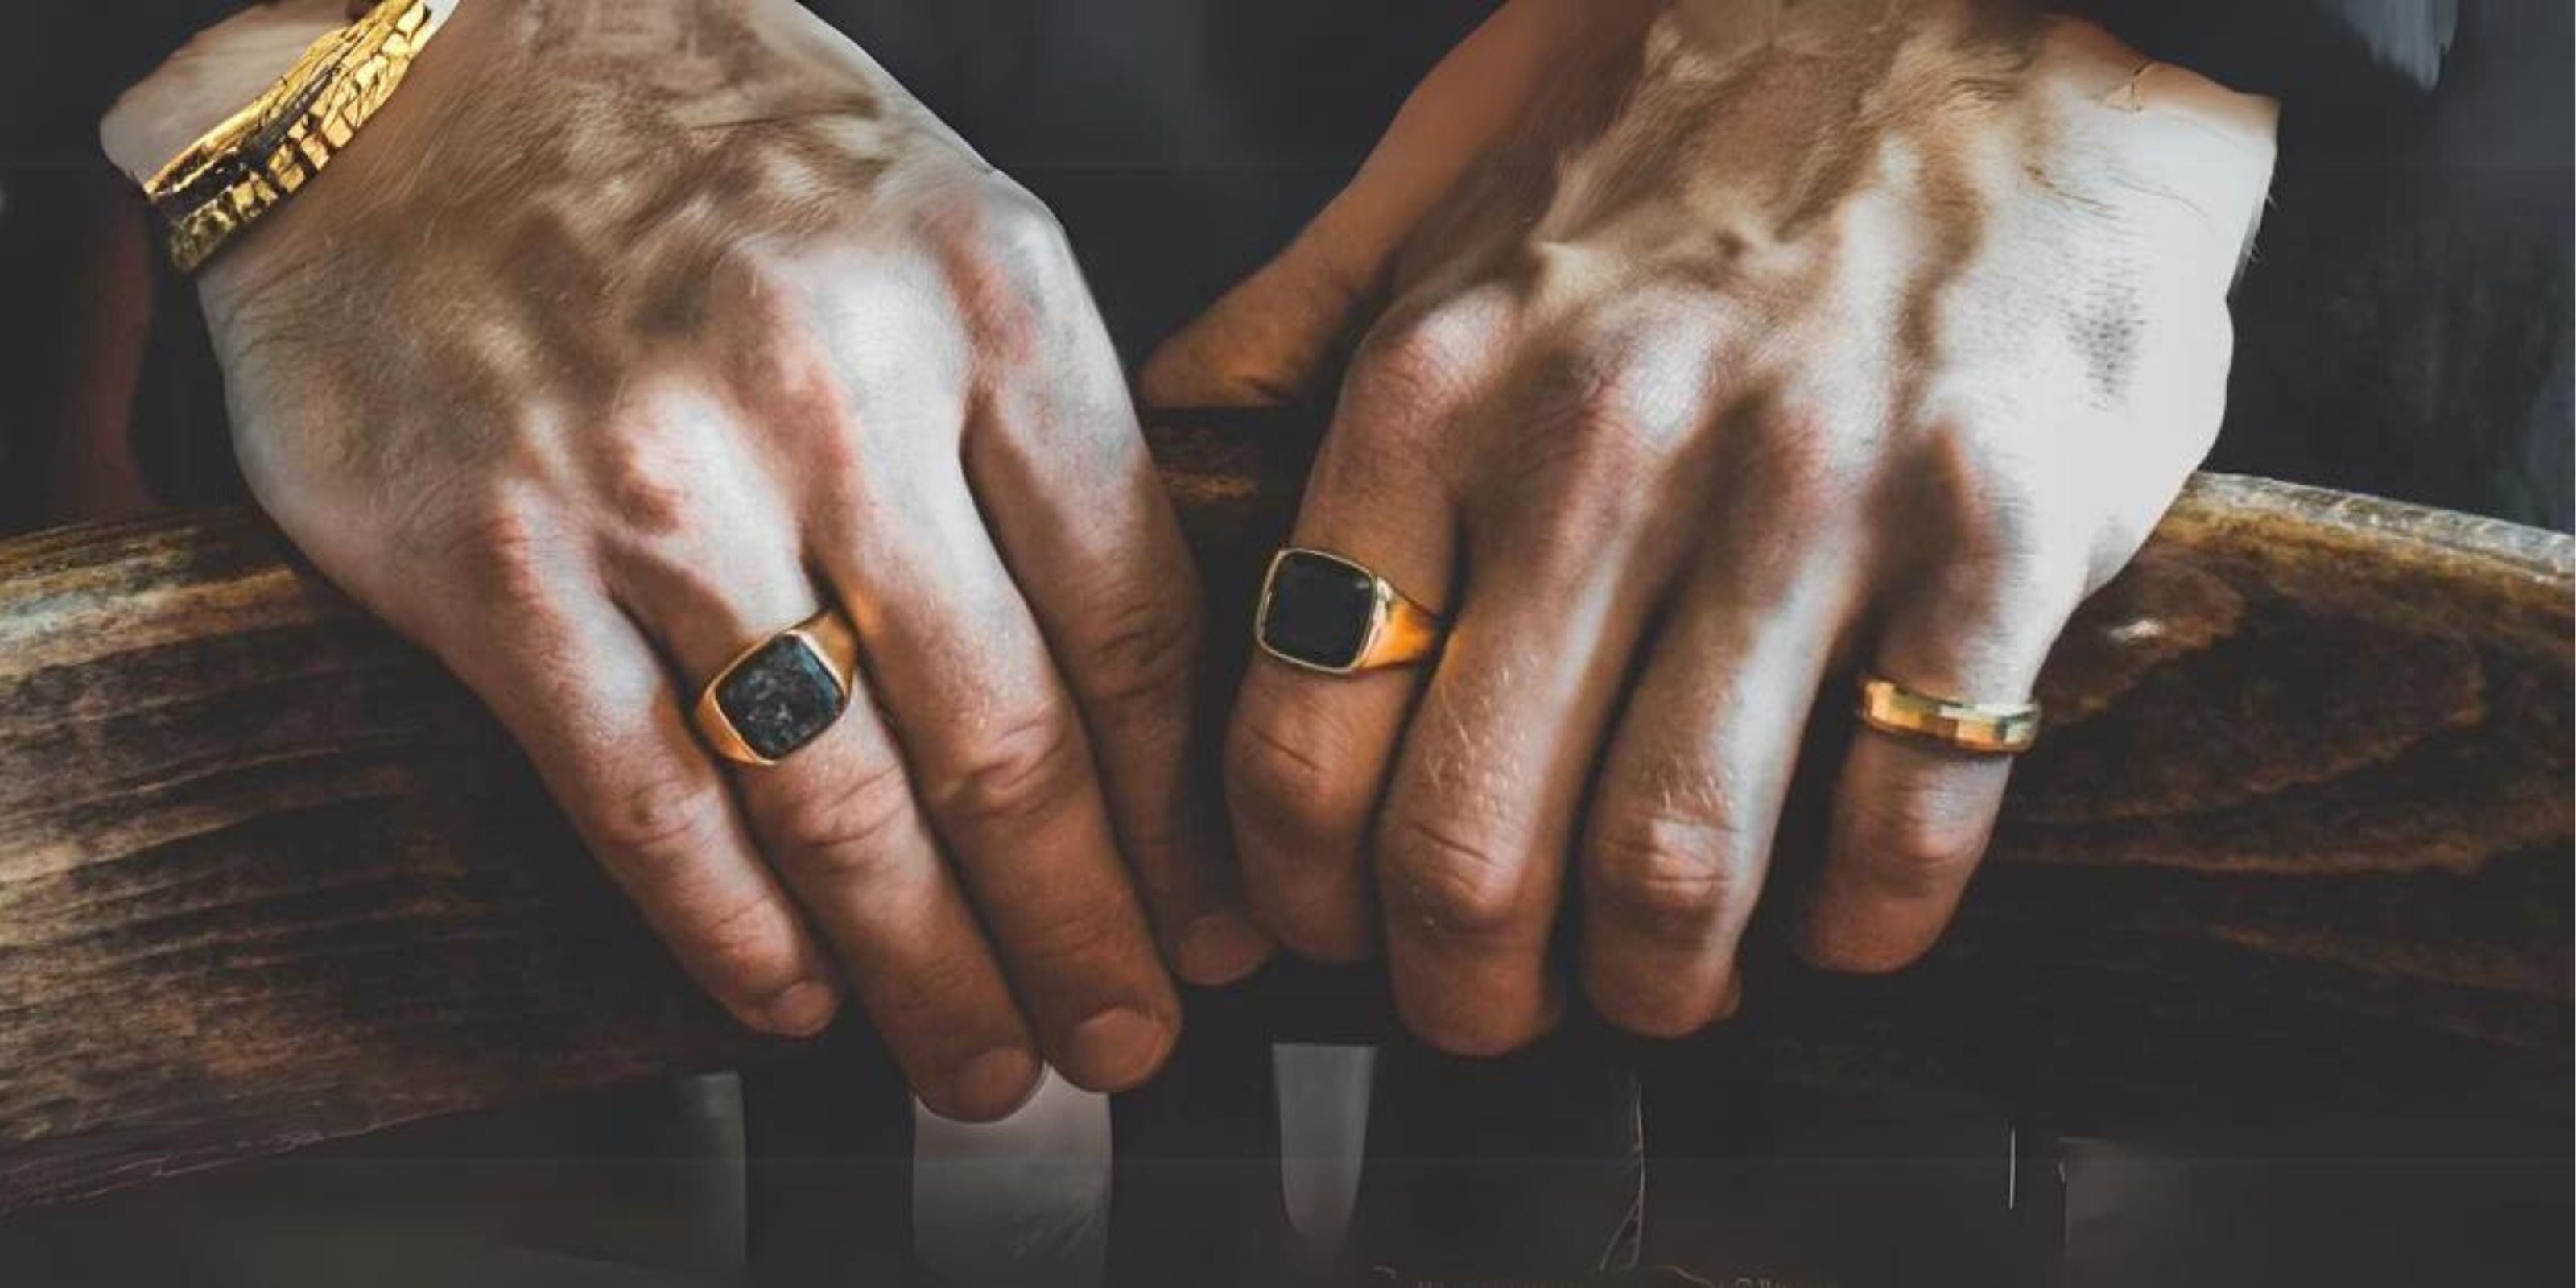 Matching Rings with Fingers: Where Men's Rings Should Be Placed